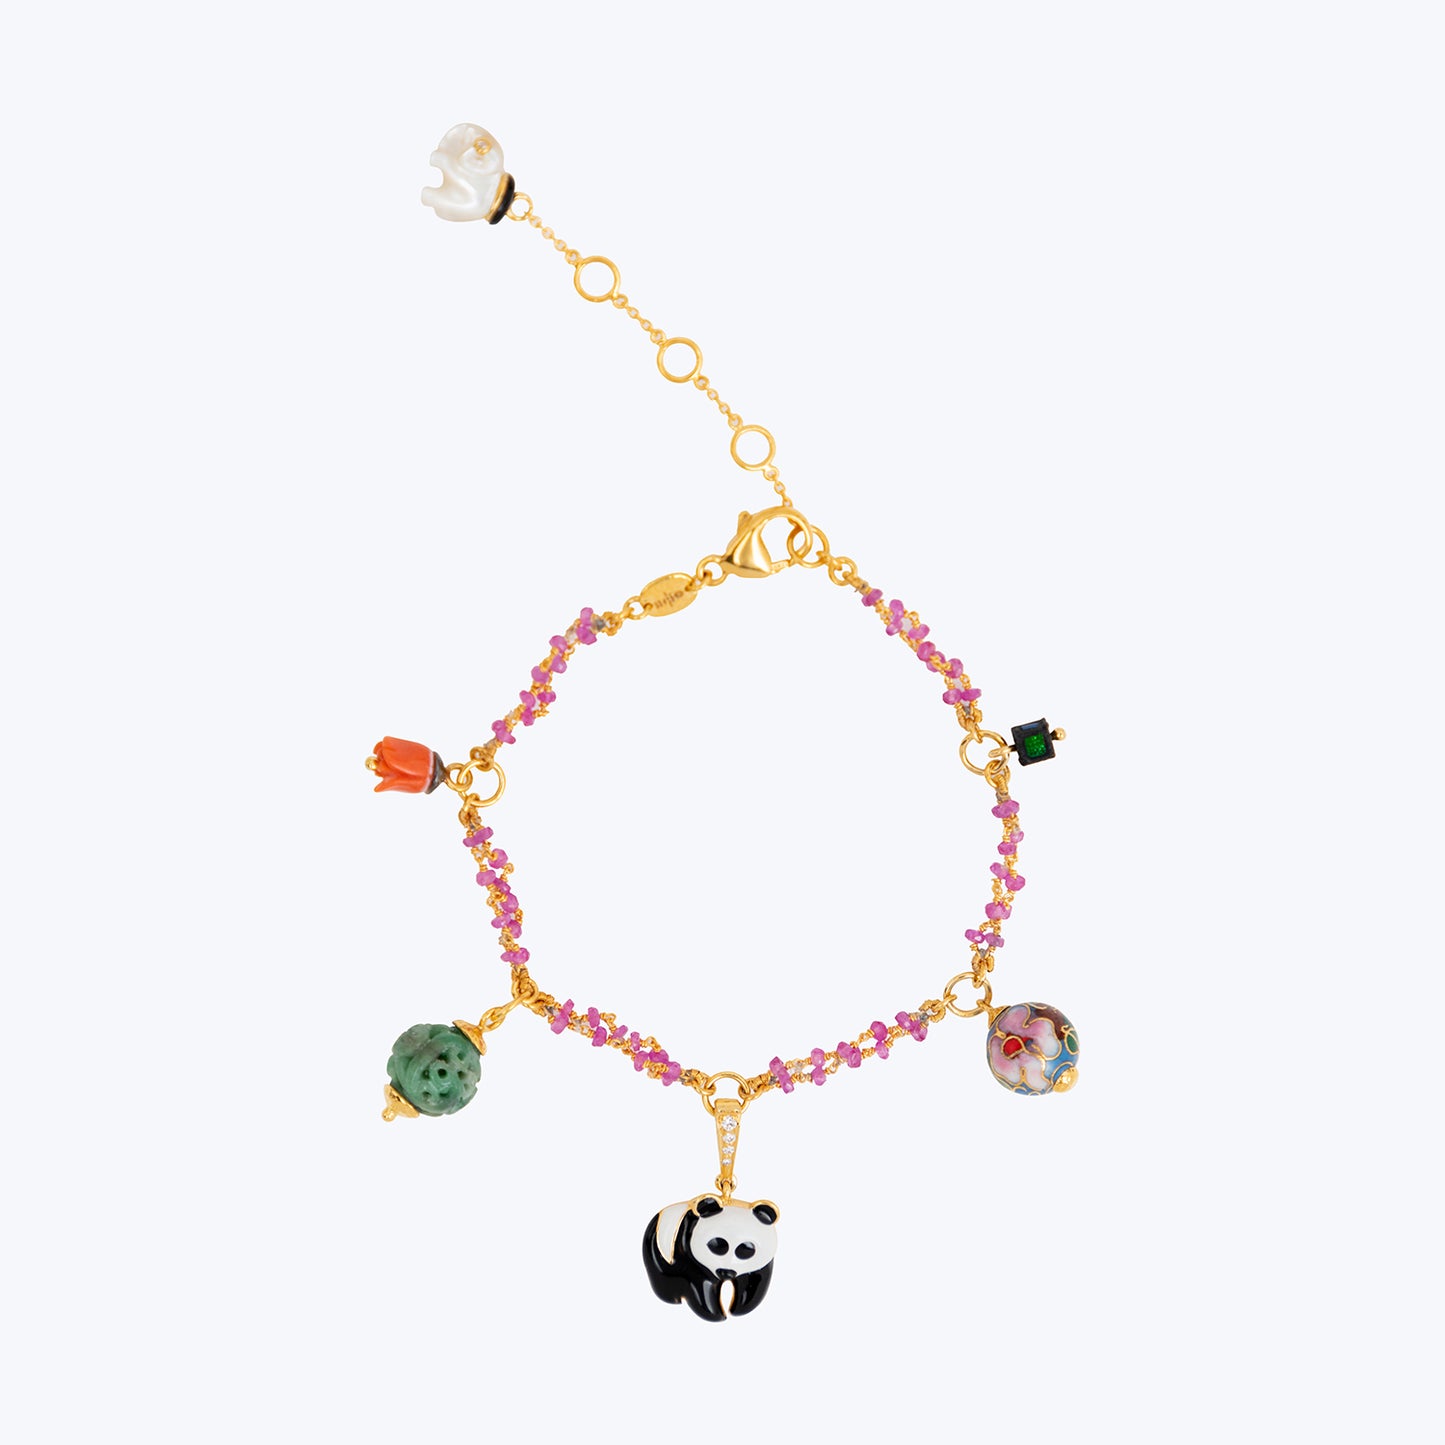 Charm Bracelet with Elephant, Scarab, Cloisonne, Jade, Red Stone and Ruby bead